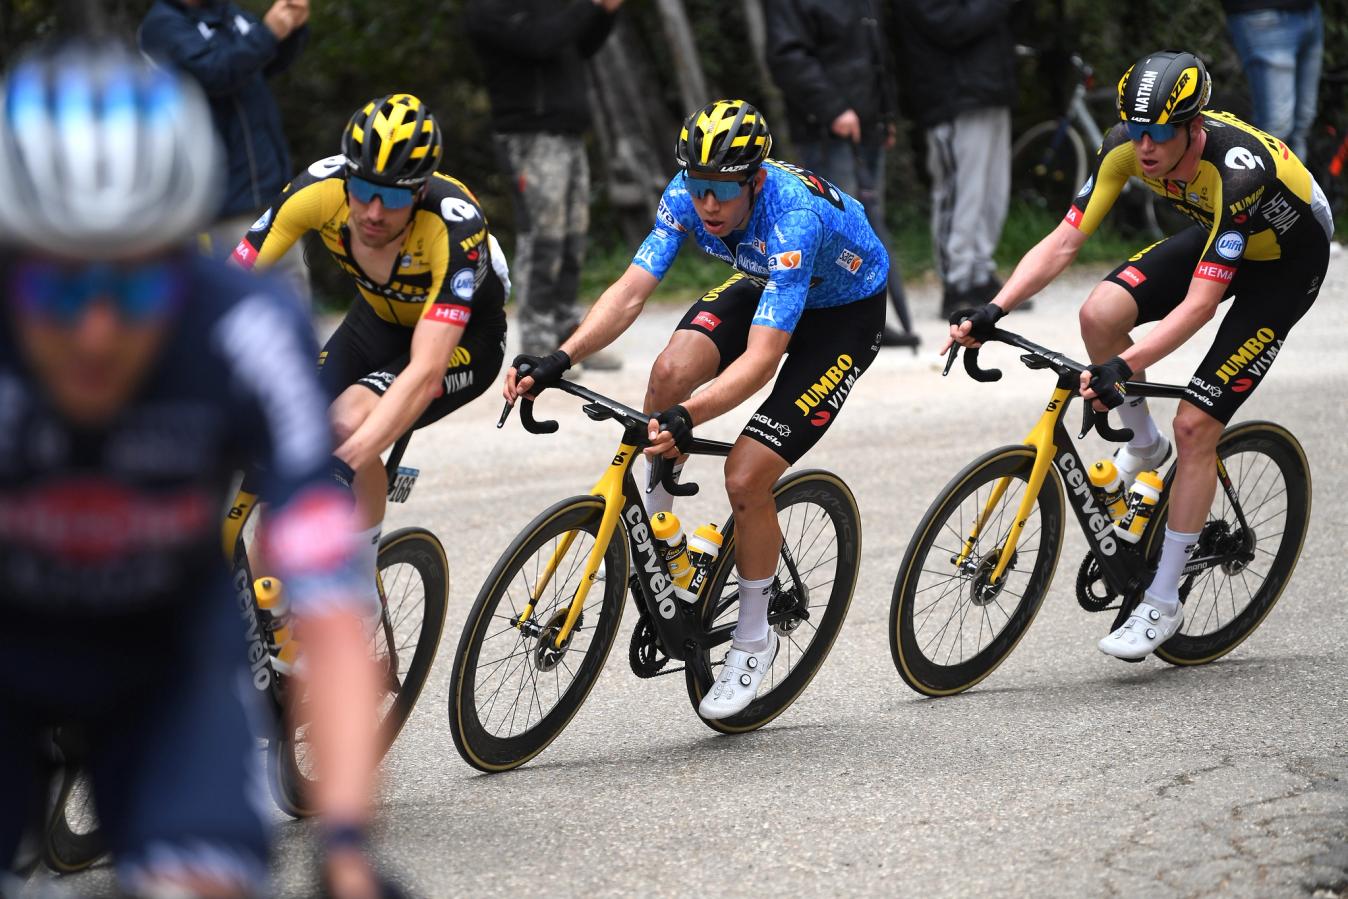 Wout van Aert was only beaten by Tadej Pogačar at the 2021 Tirreno-Adriatico, as he pipped the likes of Mikel Landa and Egan Bernal to second place